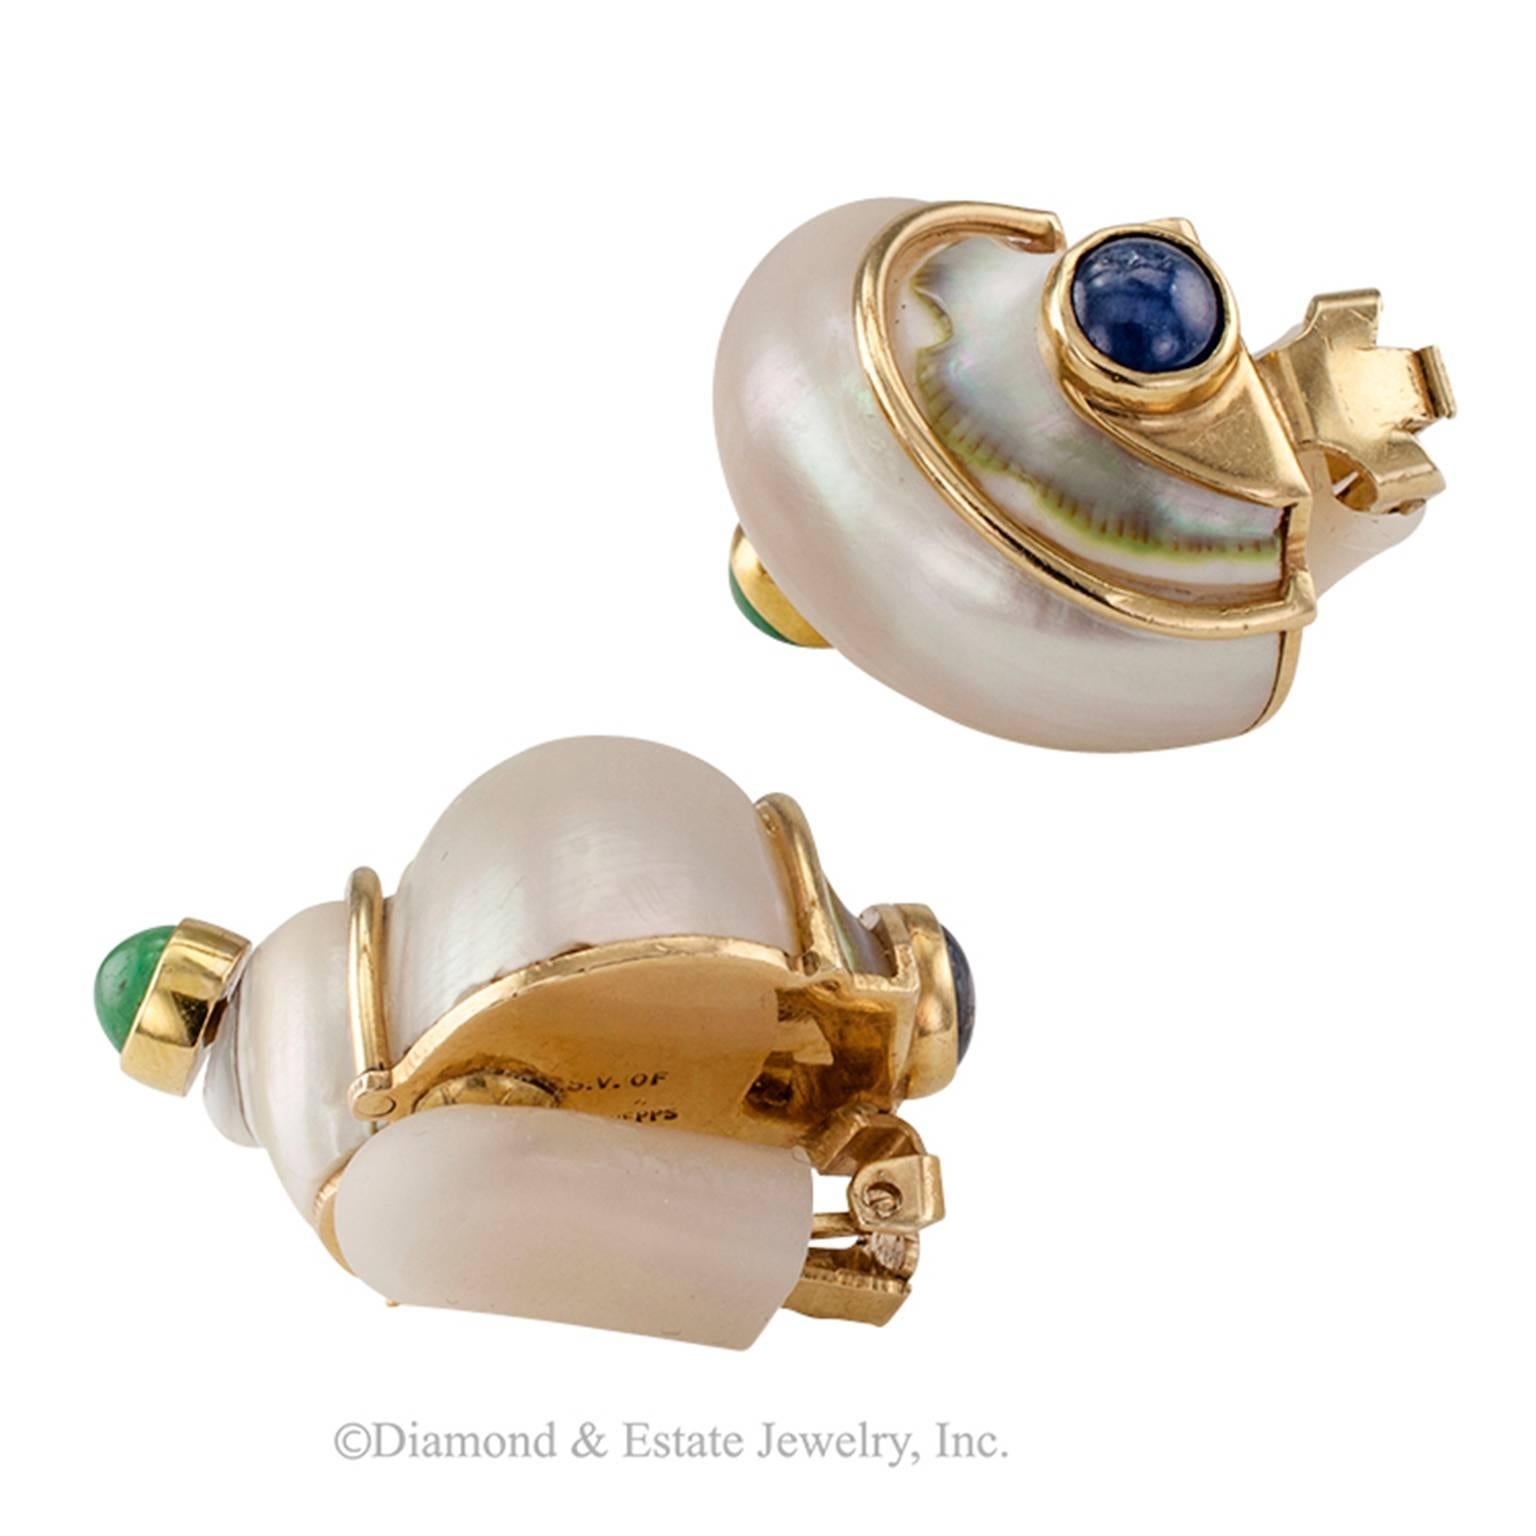 Seaman Schepps Natural Shell Emerald and Sapphire Earrings

Seaman Schepps classic shell ear clips featuring cabochon emerald tops and similarly cut sapphires on the bottoms, mounted in 14-karat gold, circa 1960. A basic must have